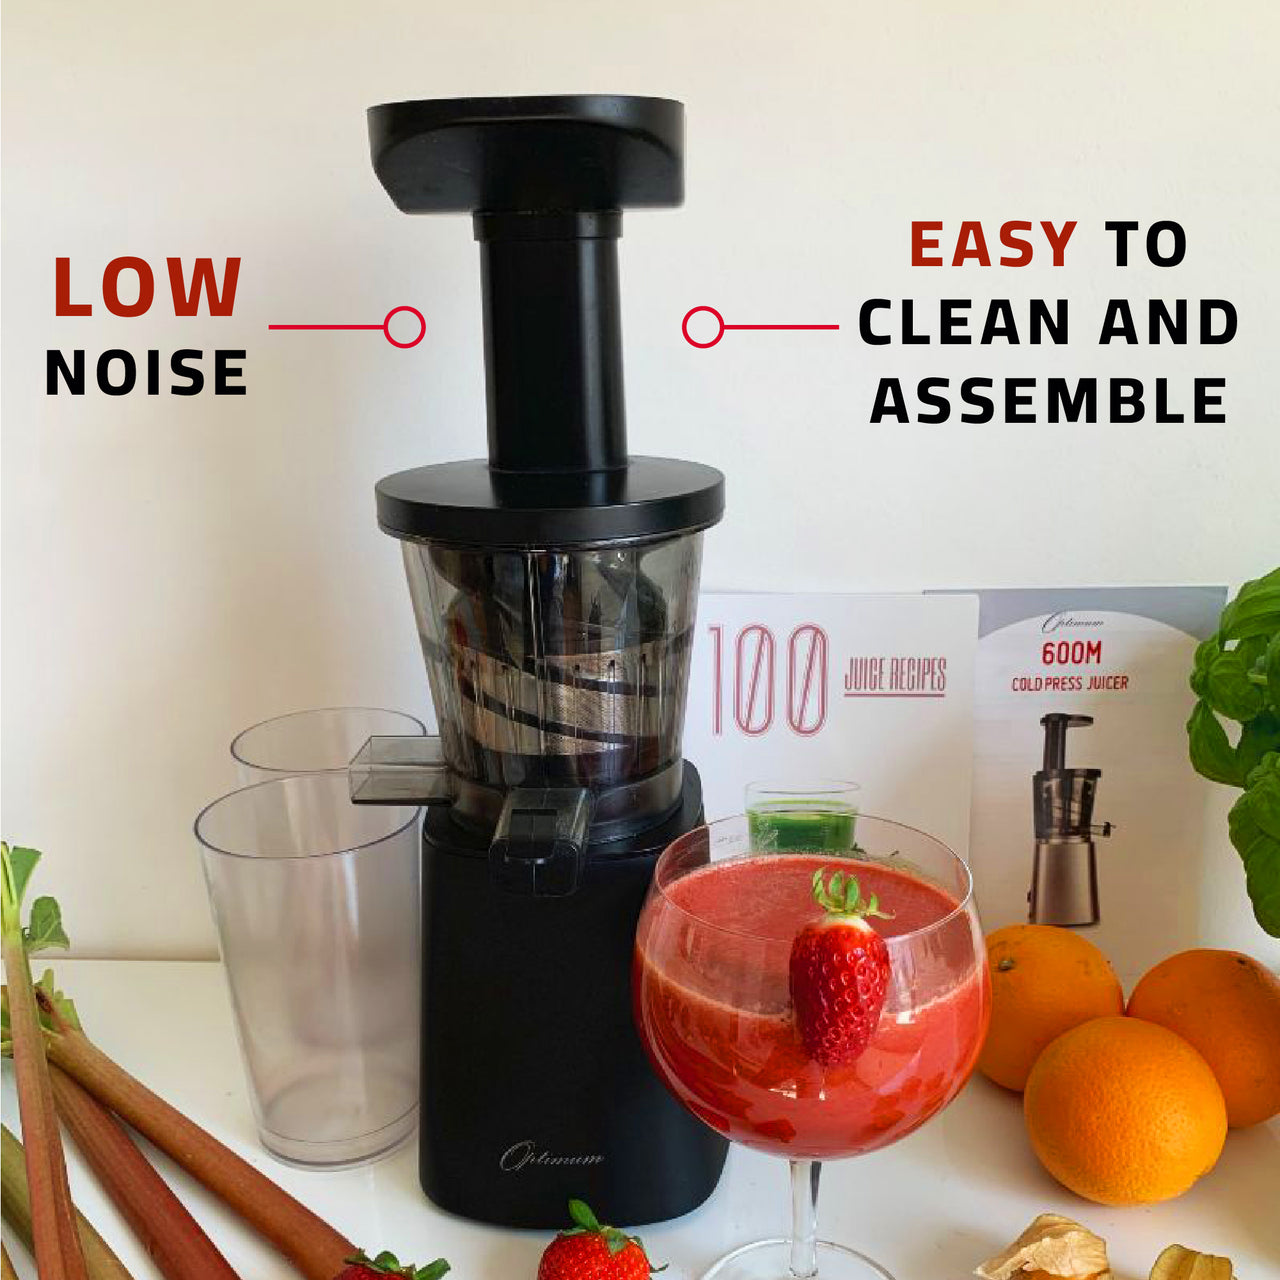 Ninja Cold Press Juicer Pro  Full Review and Demo 